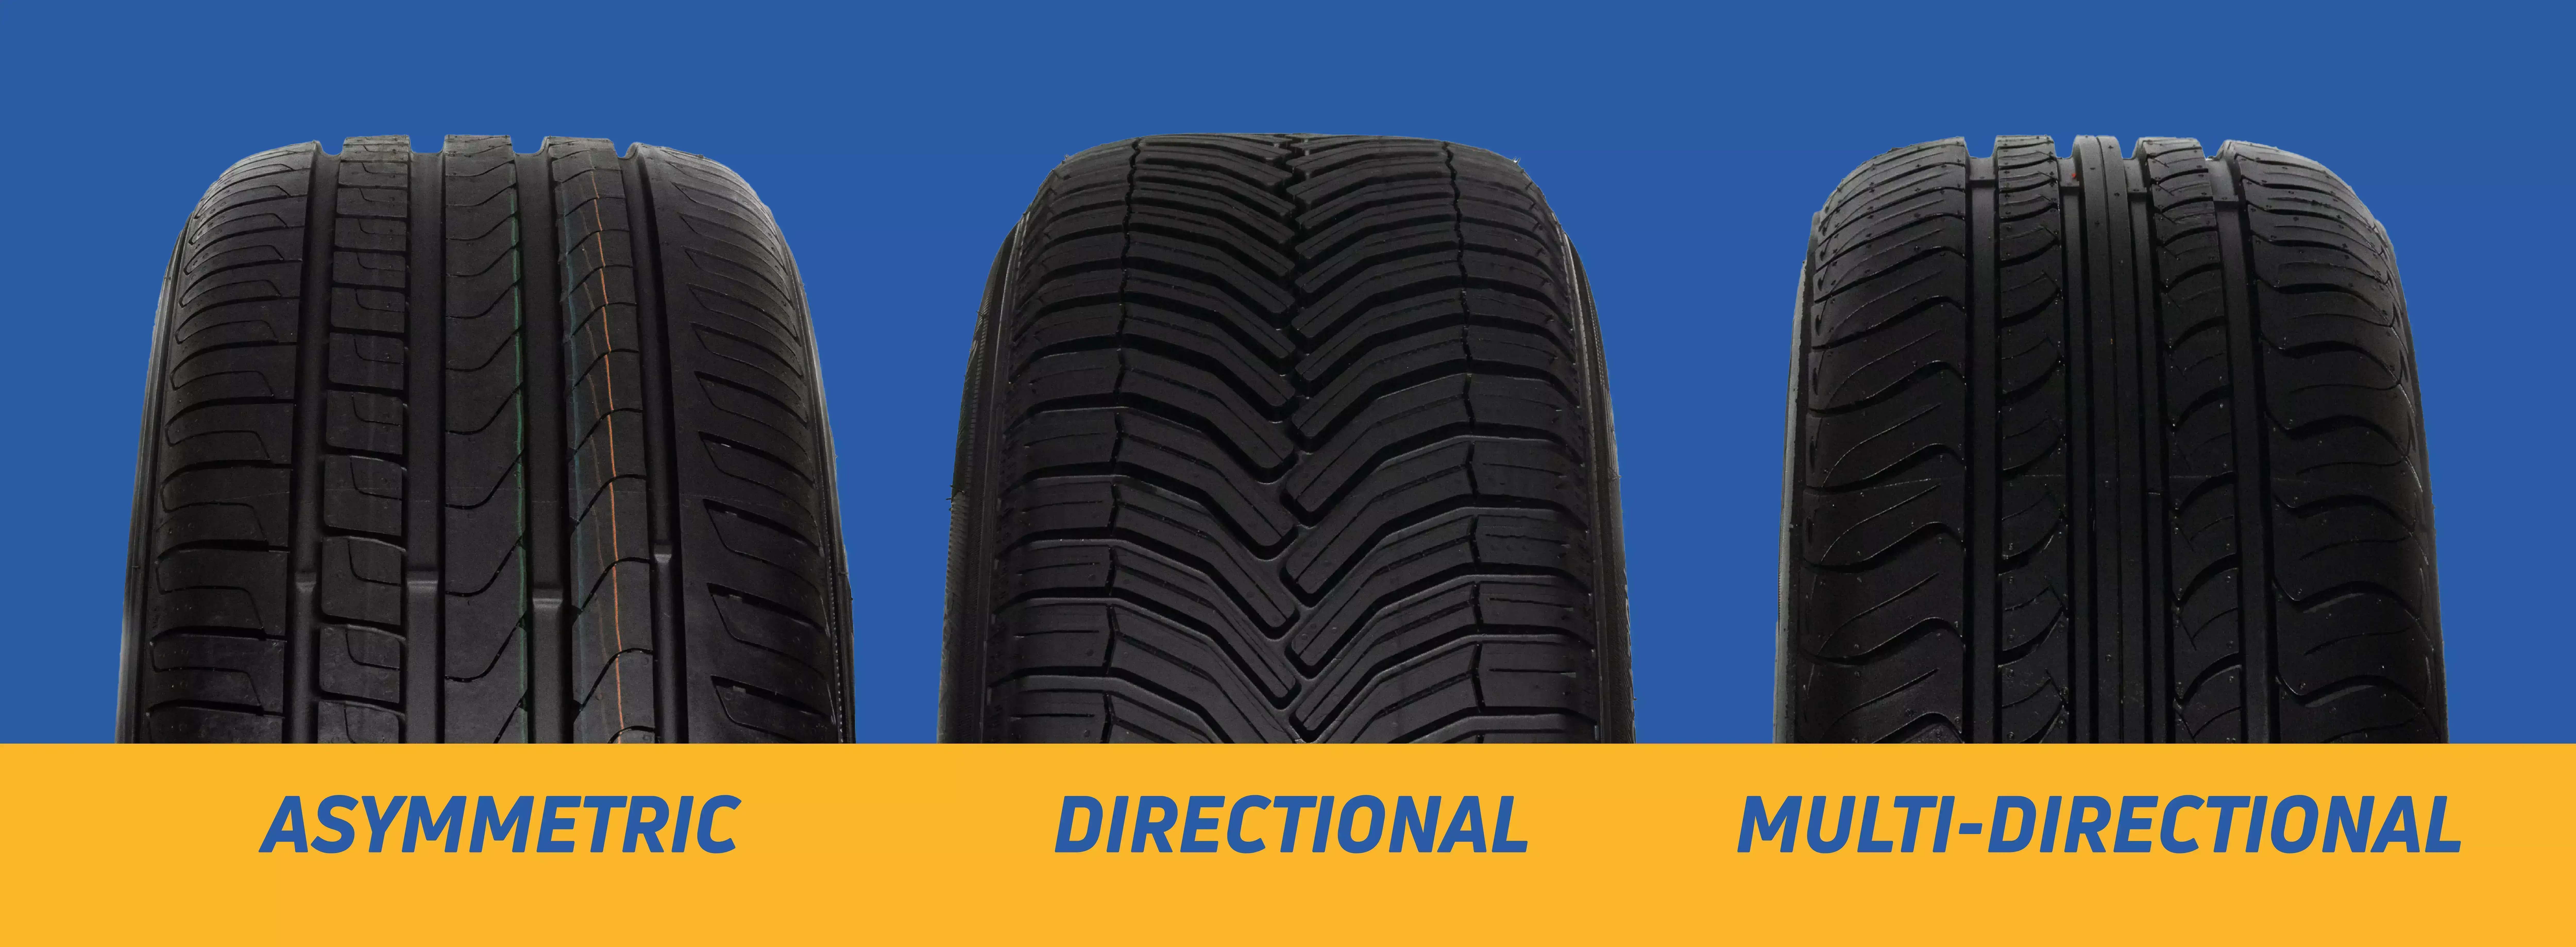 Types Of Tyres Explained - A Guide For Every Road Condition